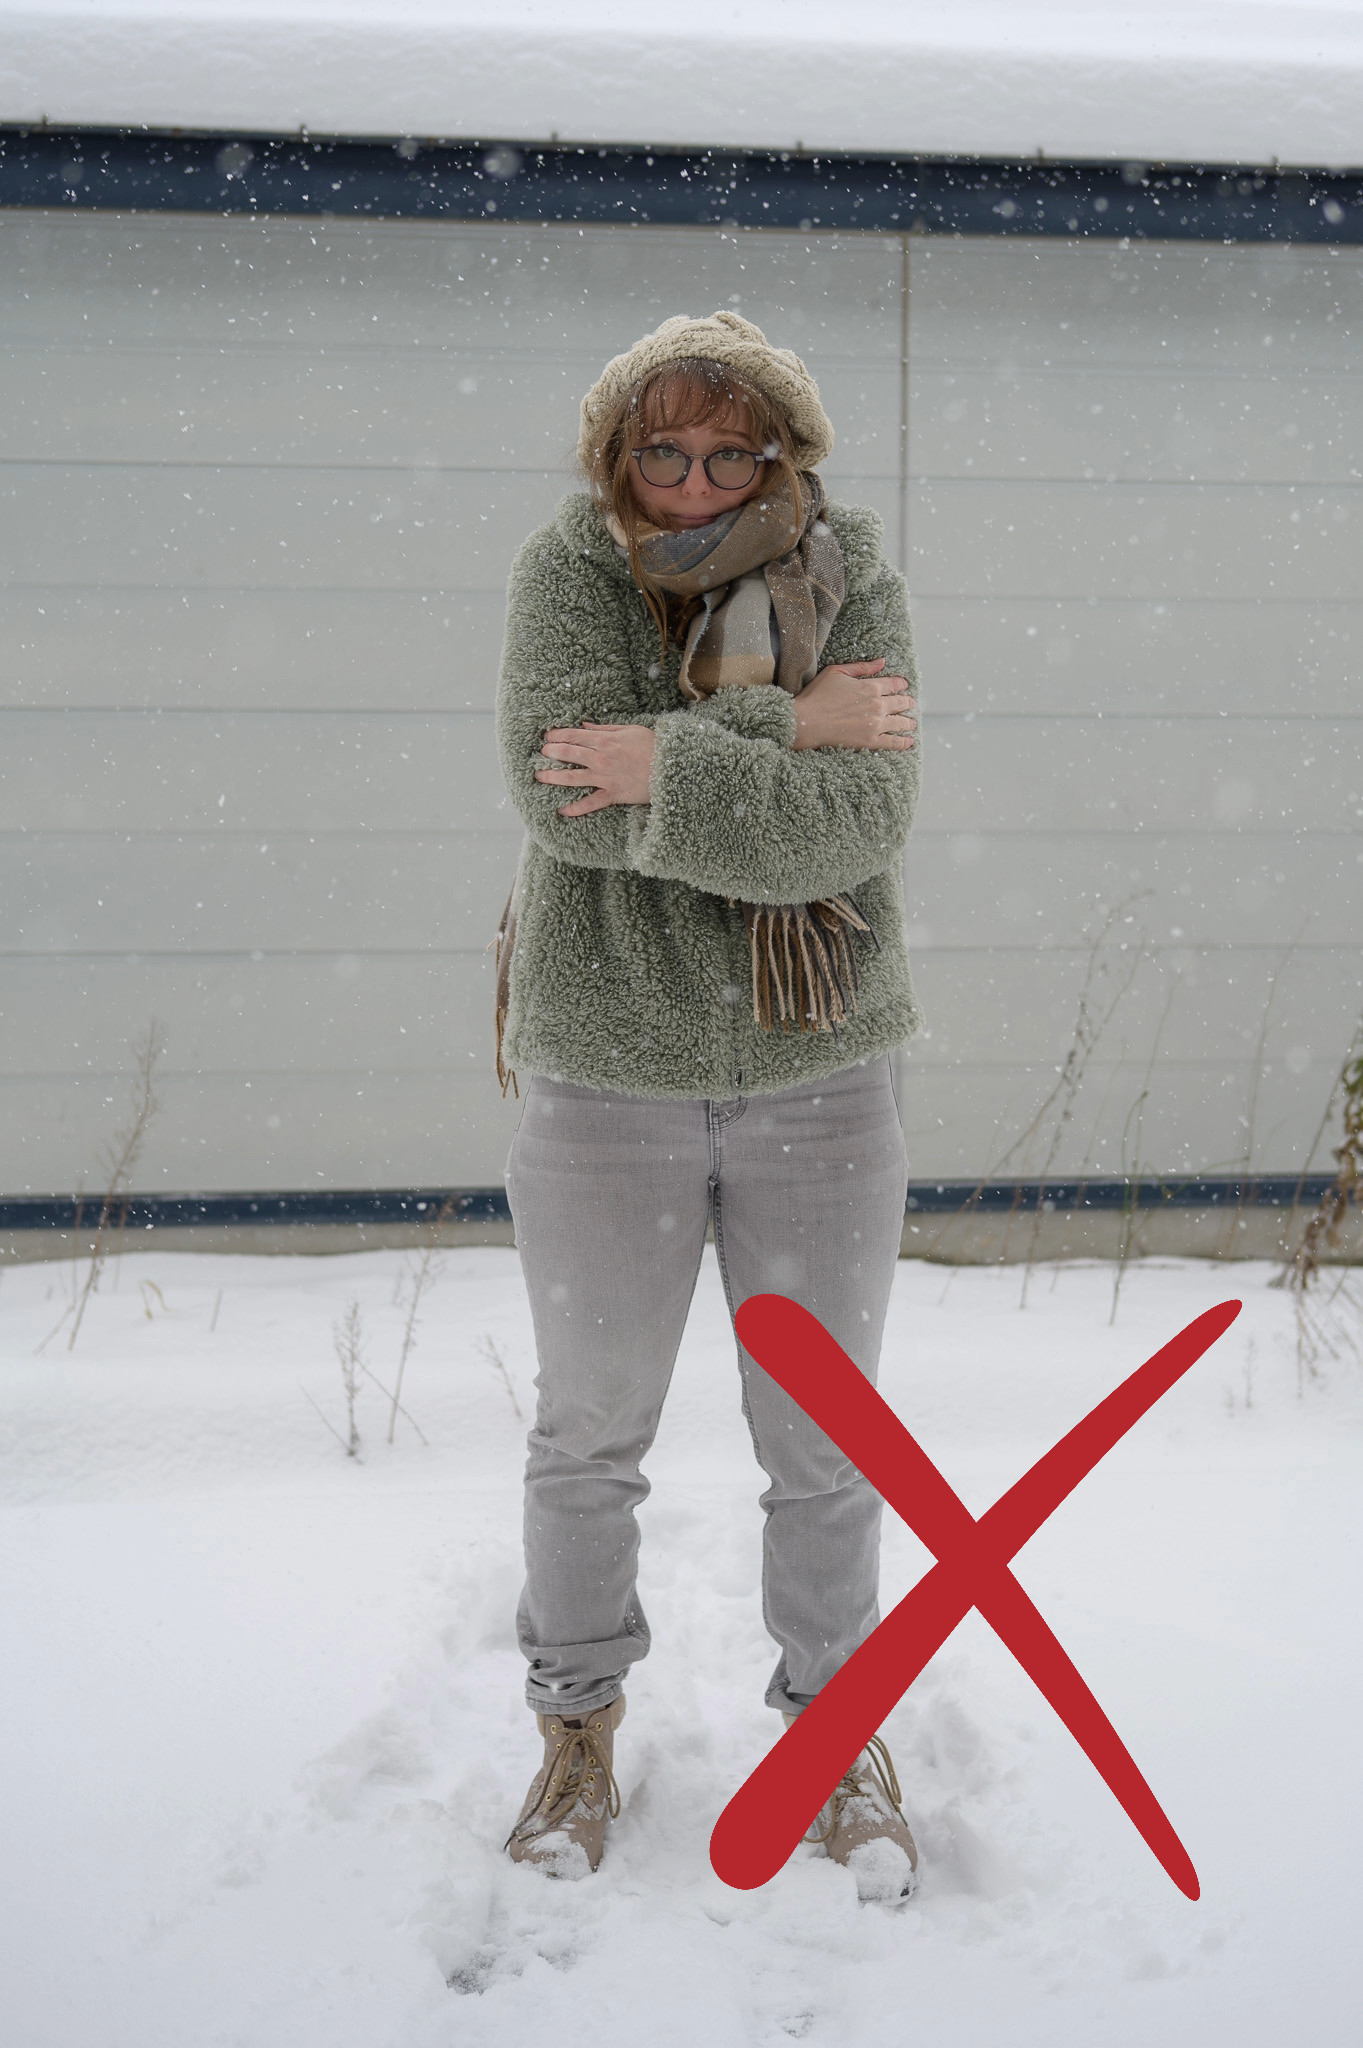 A girl with glasses stands in the snow shivering. She is wearing jeans, low-cut boots and a fuzzy teddy bear jacket, all of which don't appear to be suitable for the cold.